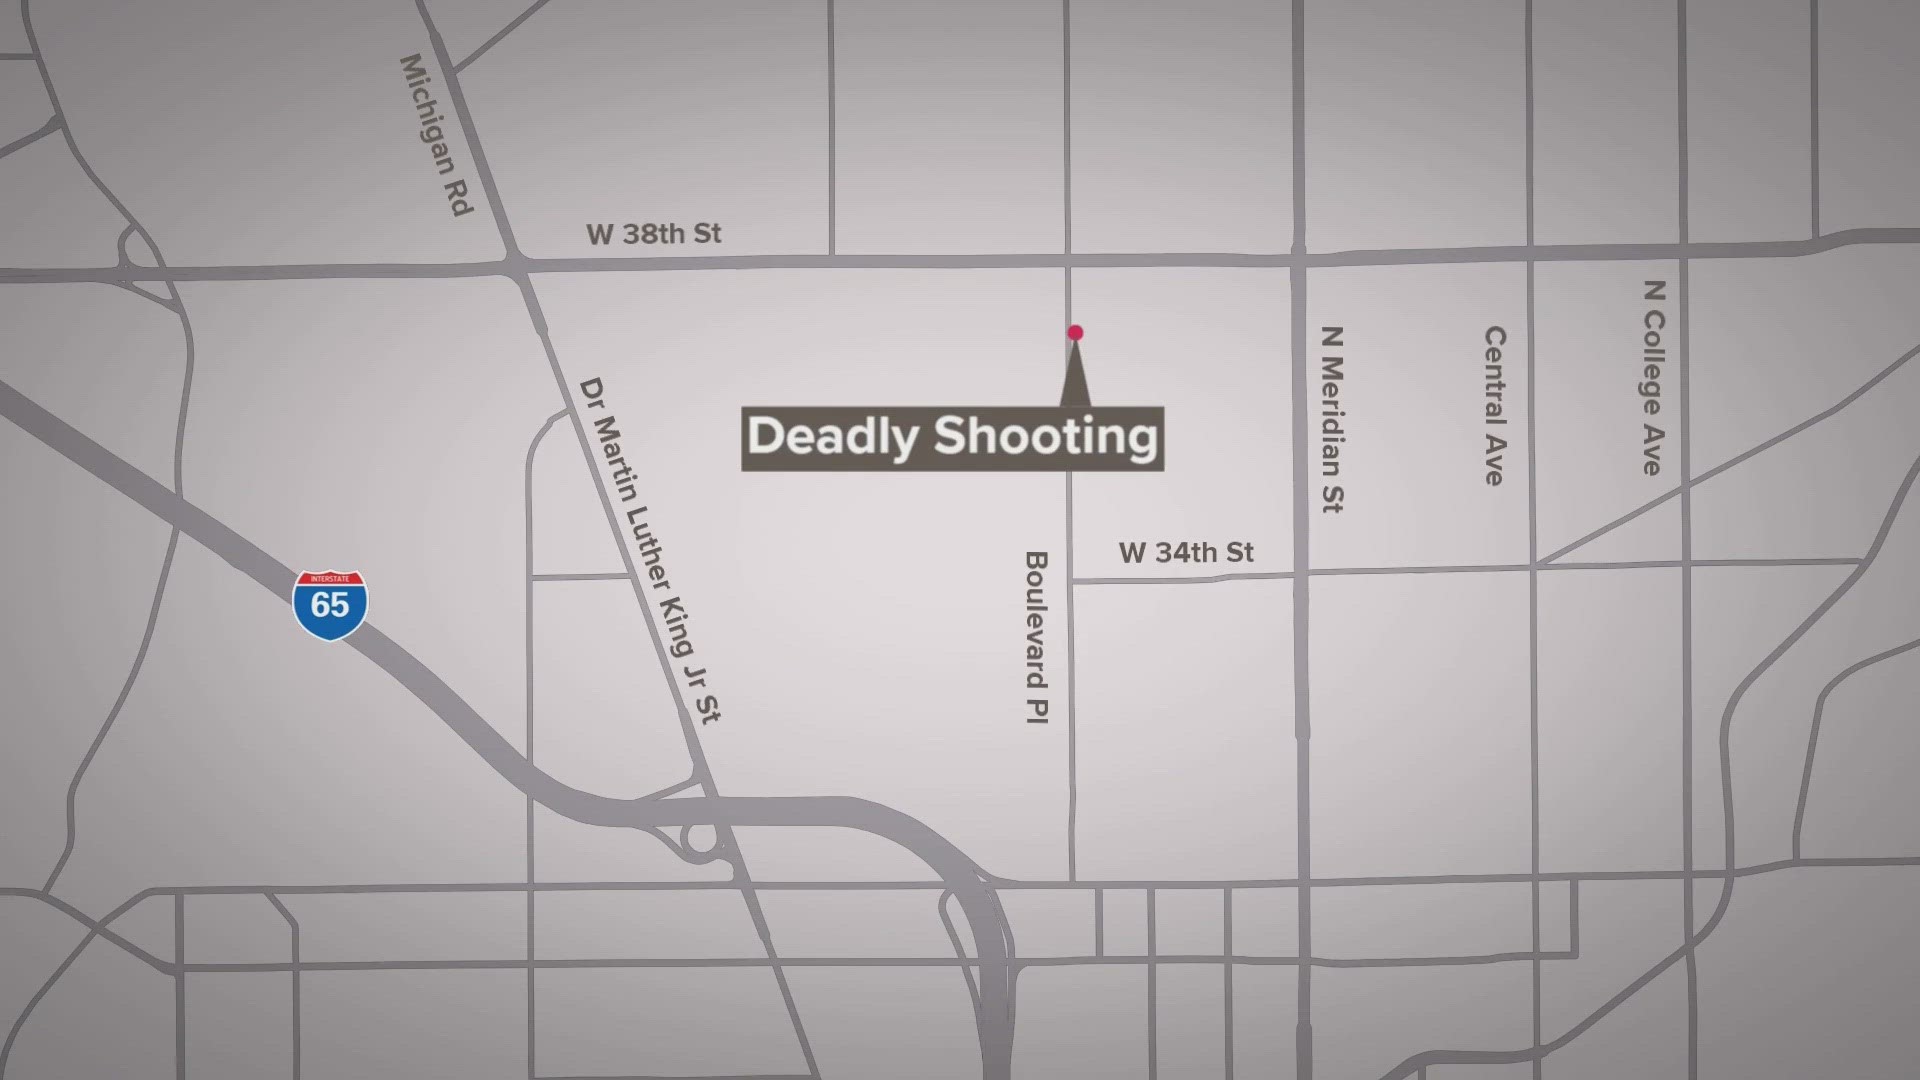 The shooting was reported around 11:15 p.m. Sunday near North Capitol Avenue and 38th Street.